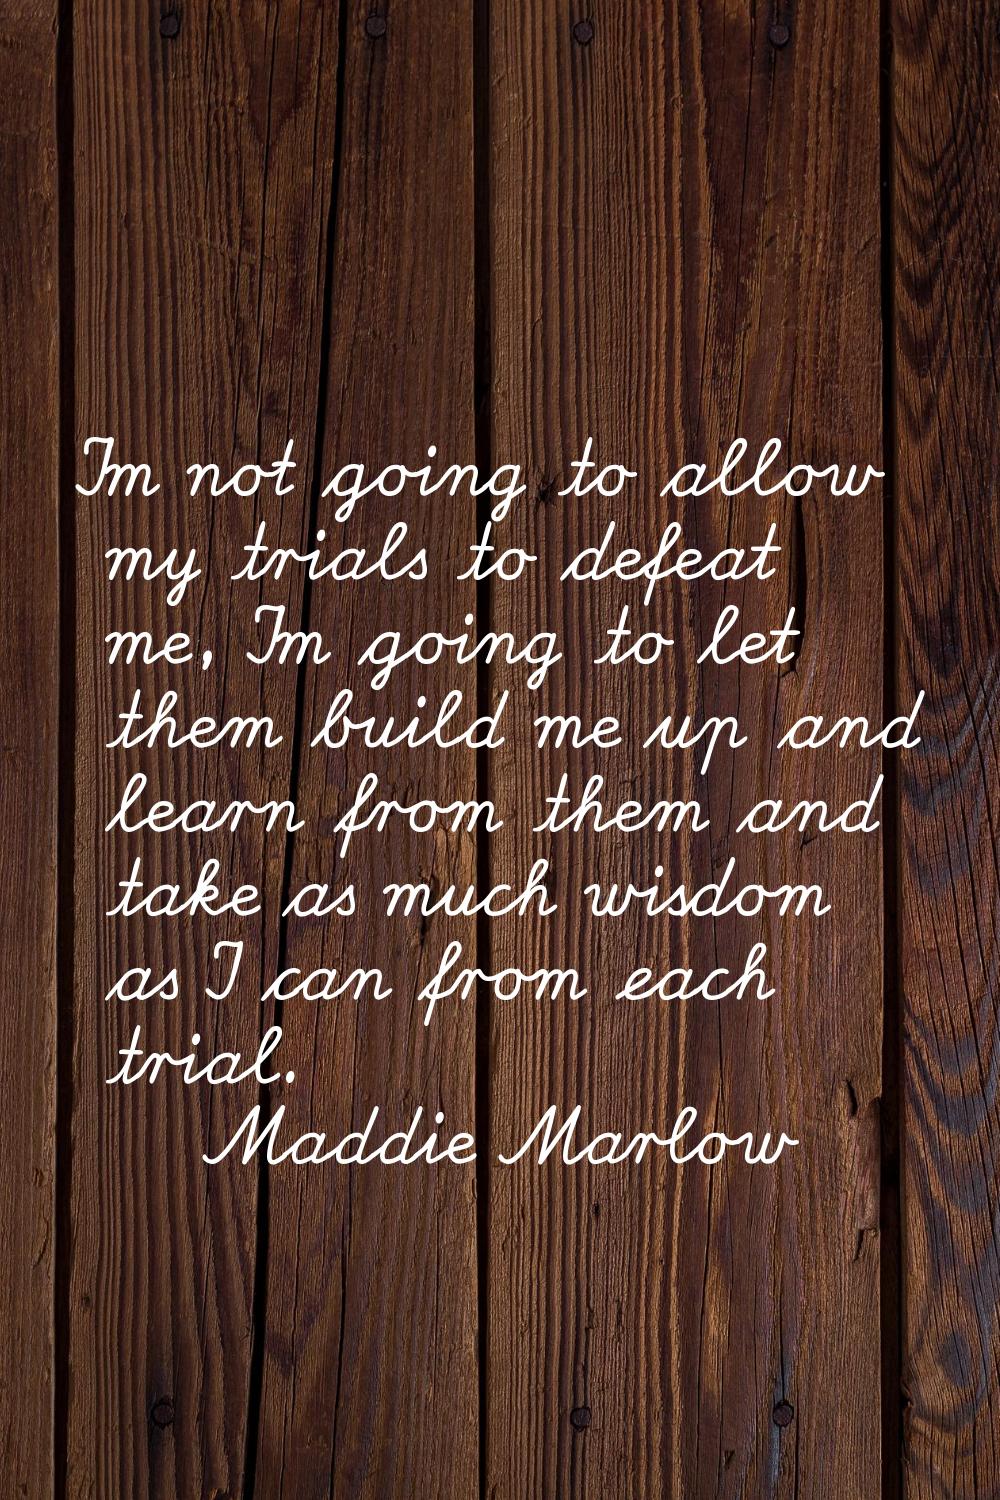 I'm not going to allow my trials to defeat me, I'm going to let them build me up and learn from the